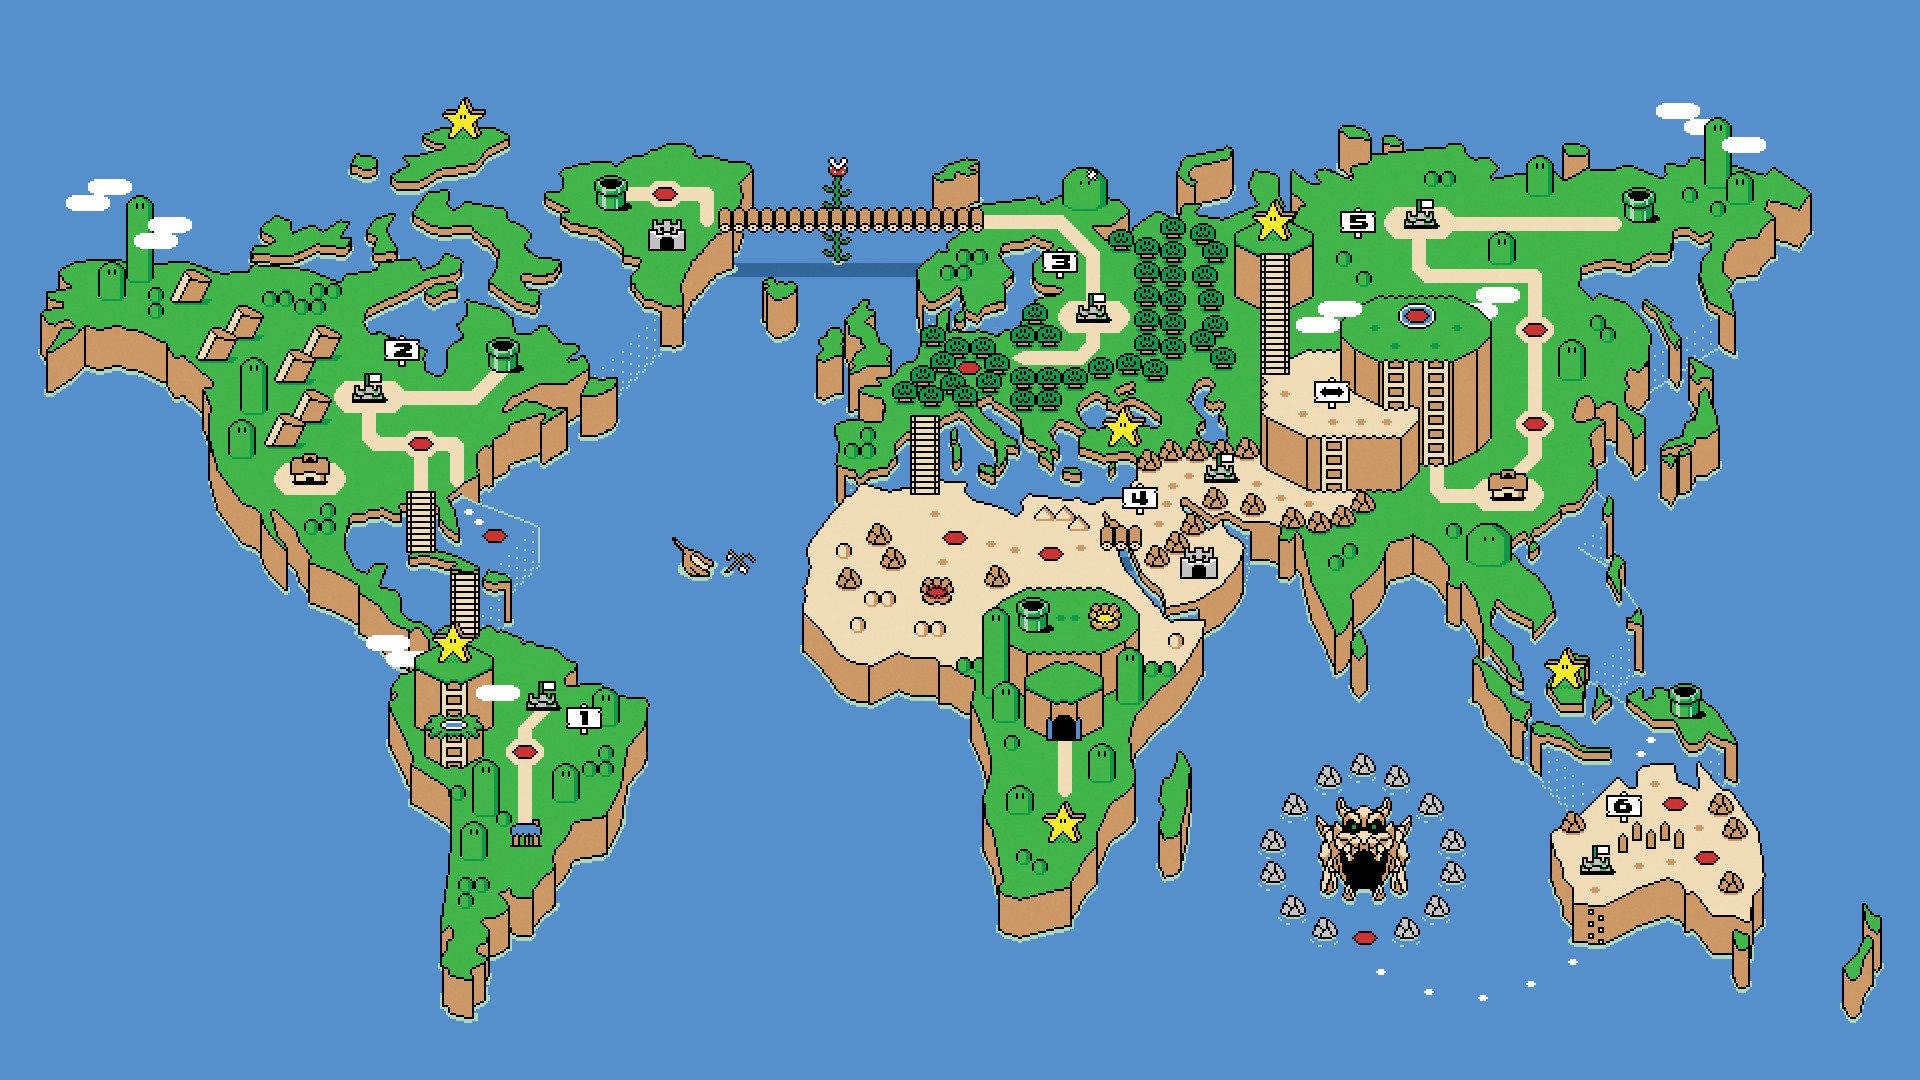 1920x1080 Super Mario World Global Map [1920 x 1080] (Xpost /r/Mapporn) ...